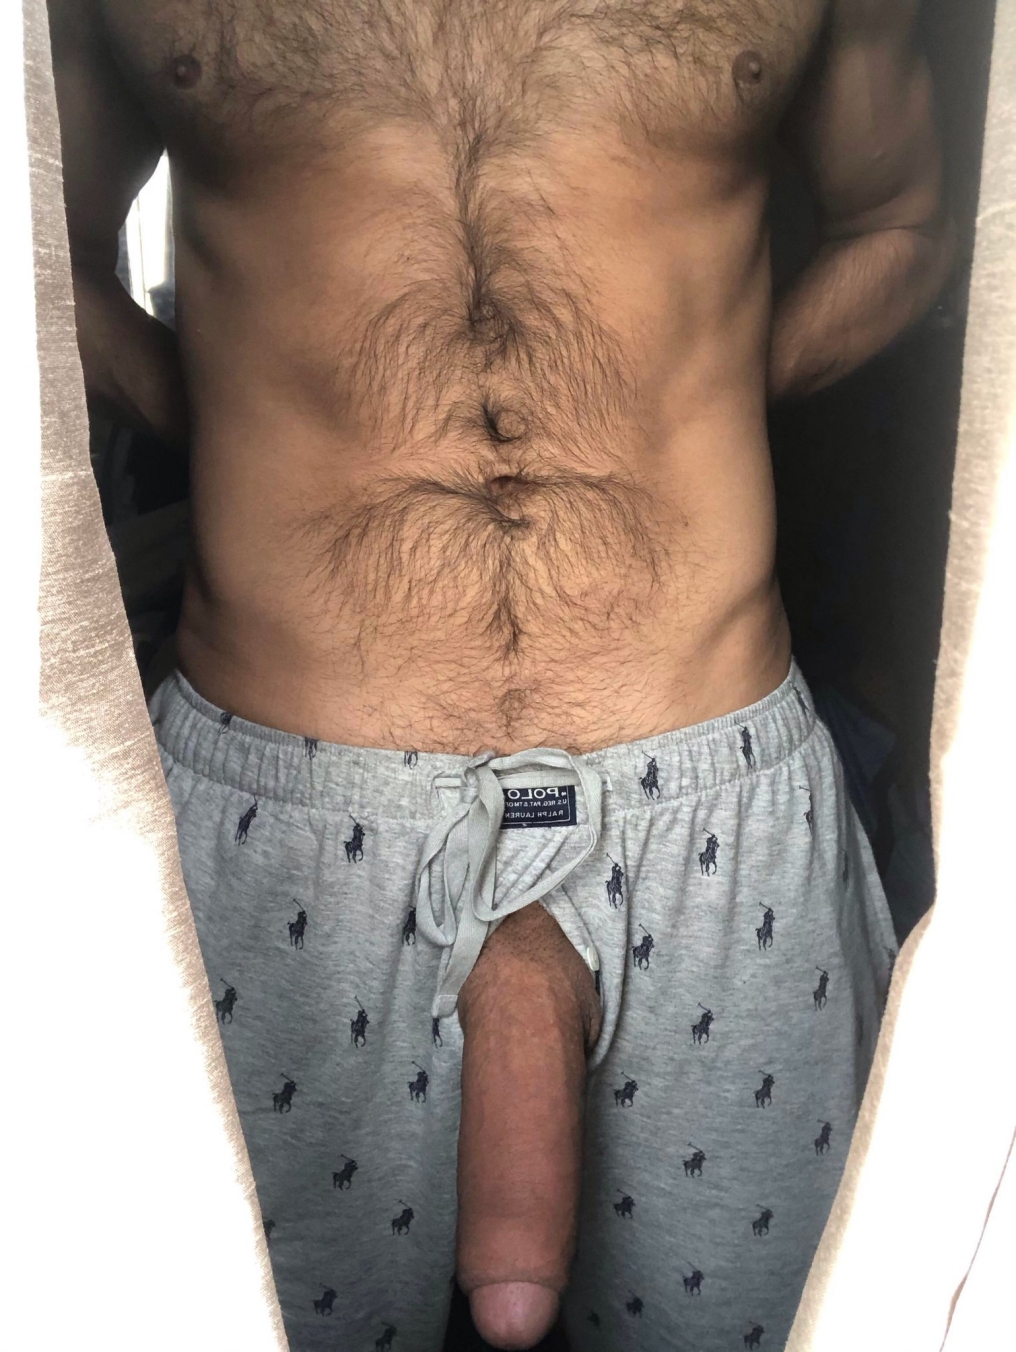 bill semko recommends hairy guys big dicks pic